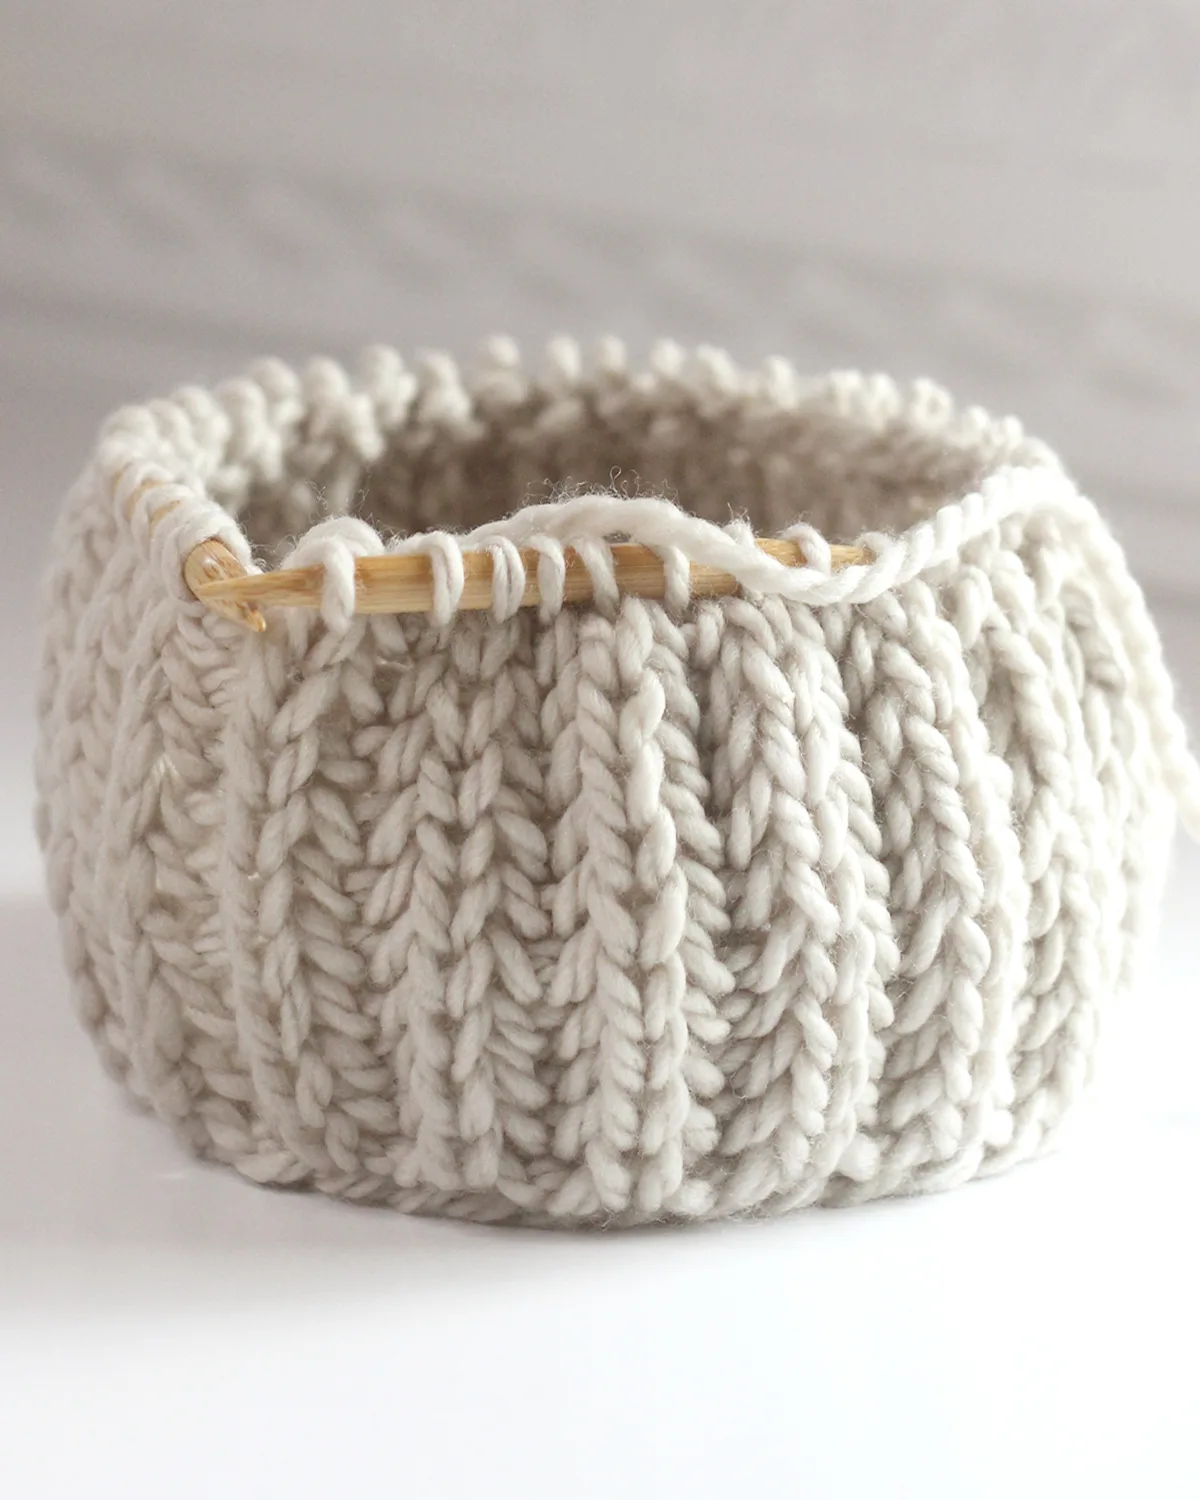 Fisherman's Rib knit stitch texture on circular wooden bamboo needles with beige colored yarn.